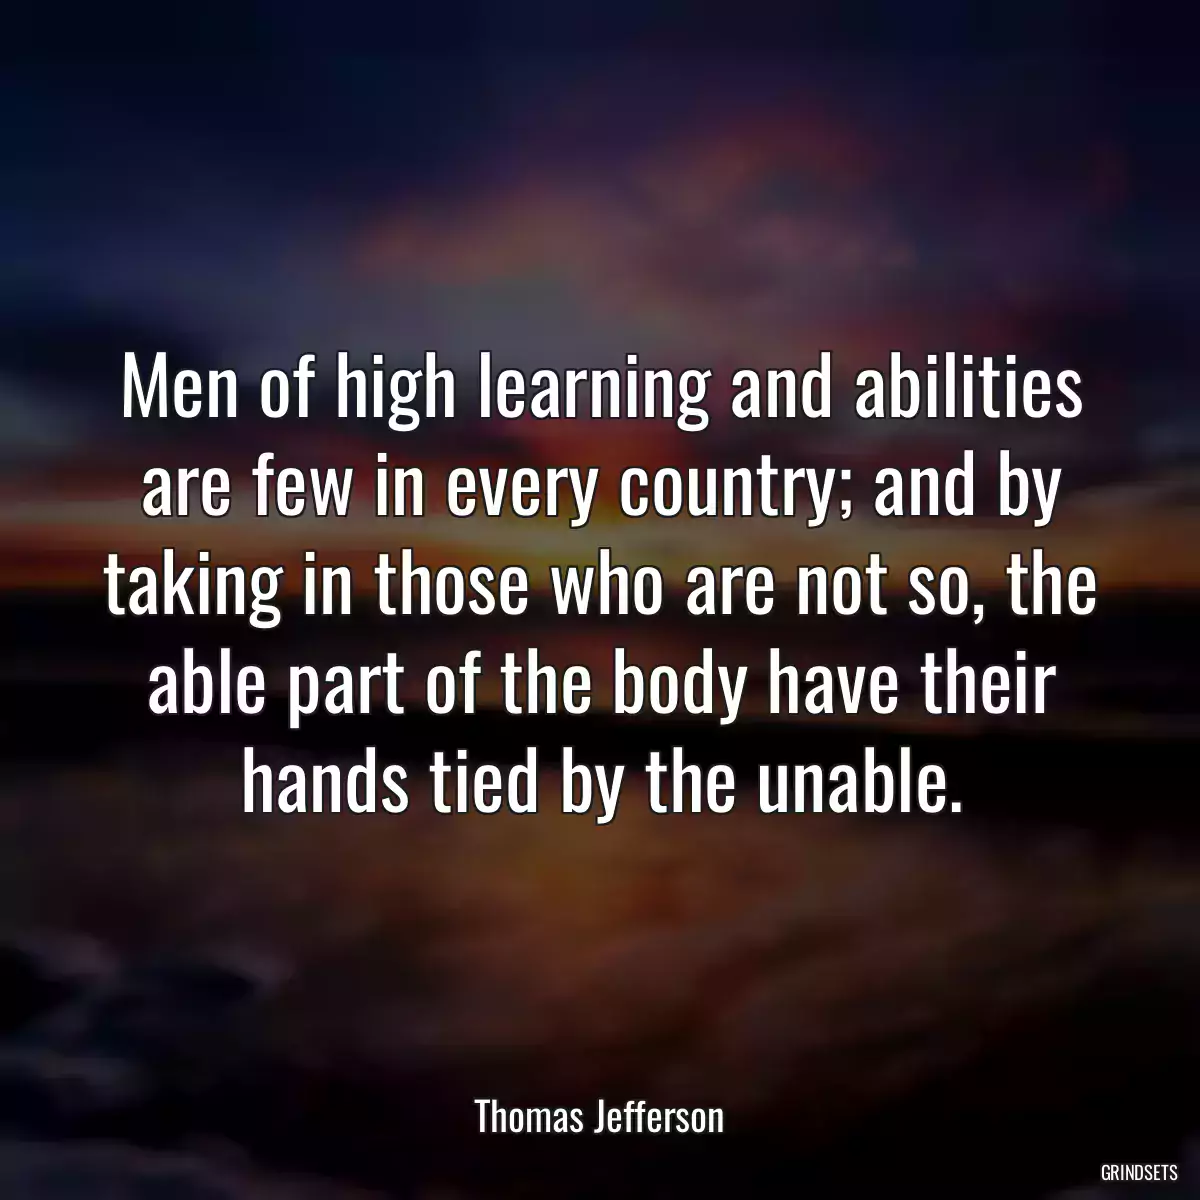 Men of high learning and abilities are few in every country; and by taking in those who are not so, the able part of the body have their hands tied by the unable.